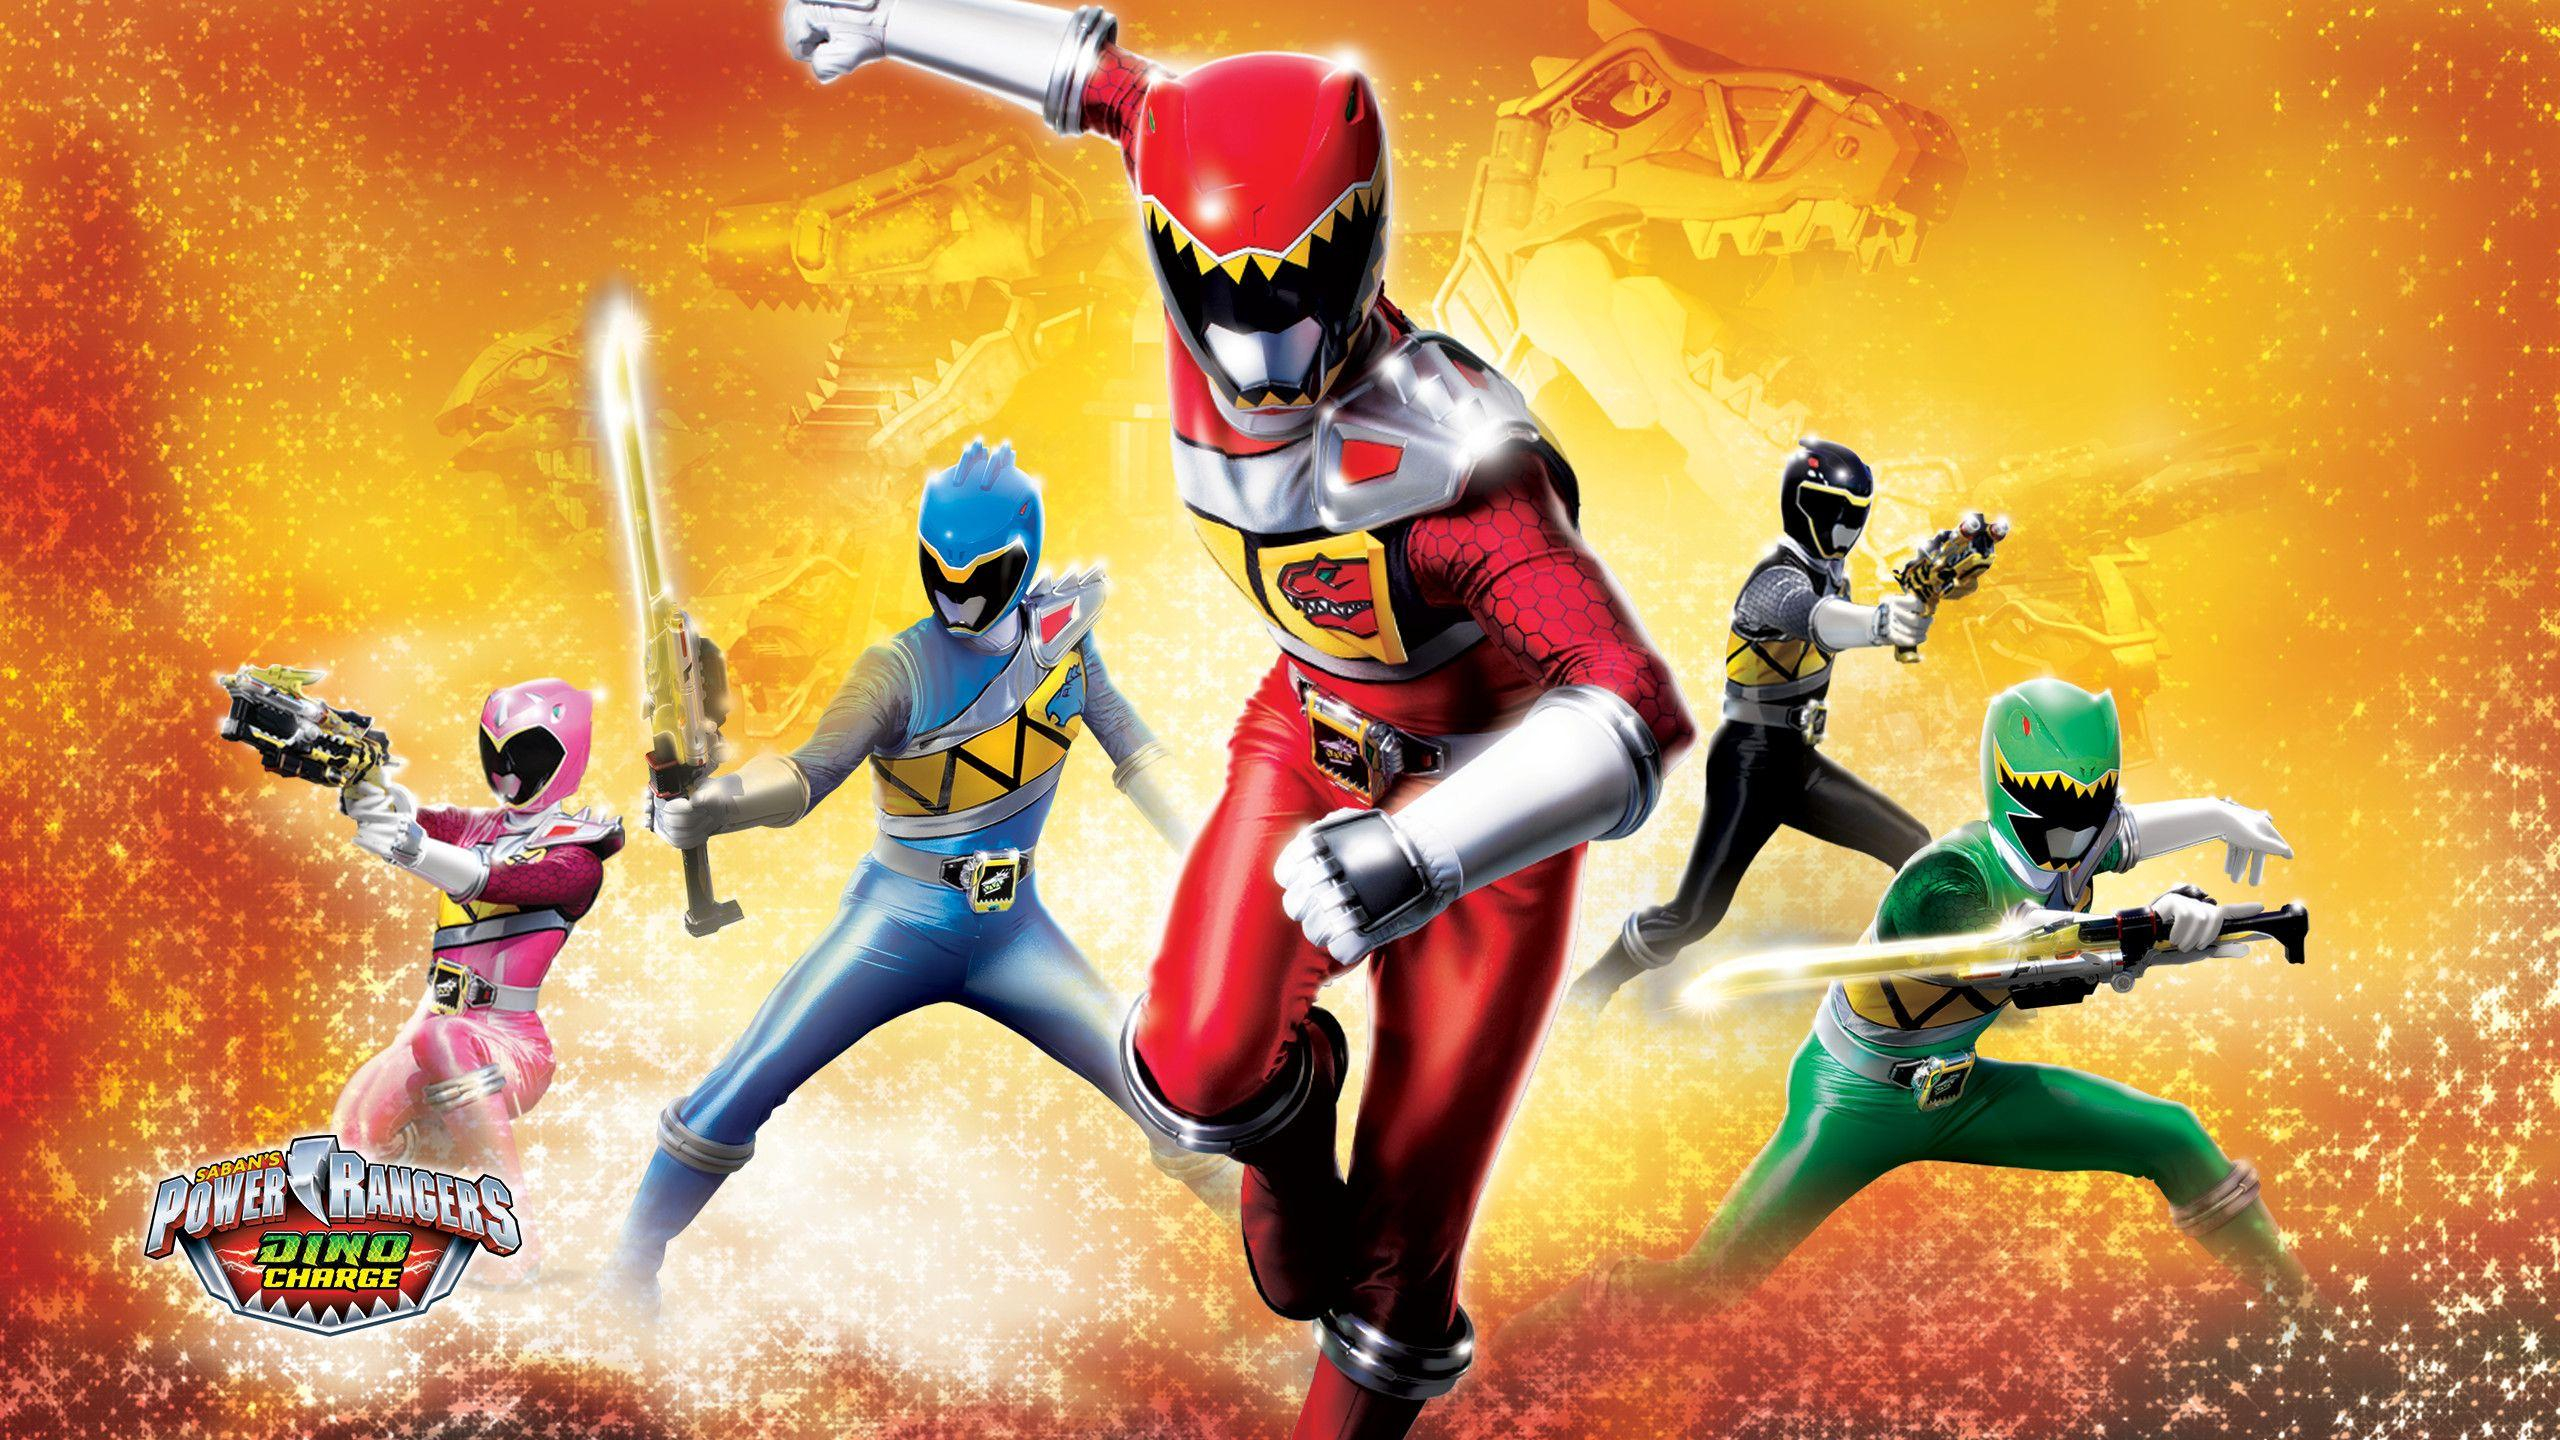 2560x1440 Power Rangers Dino Charge Wallpapers